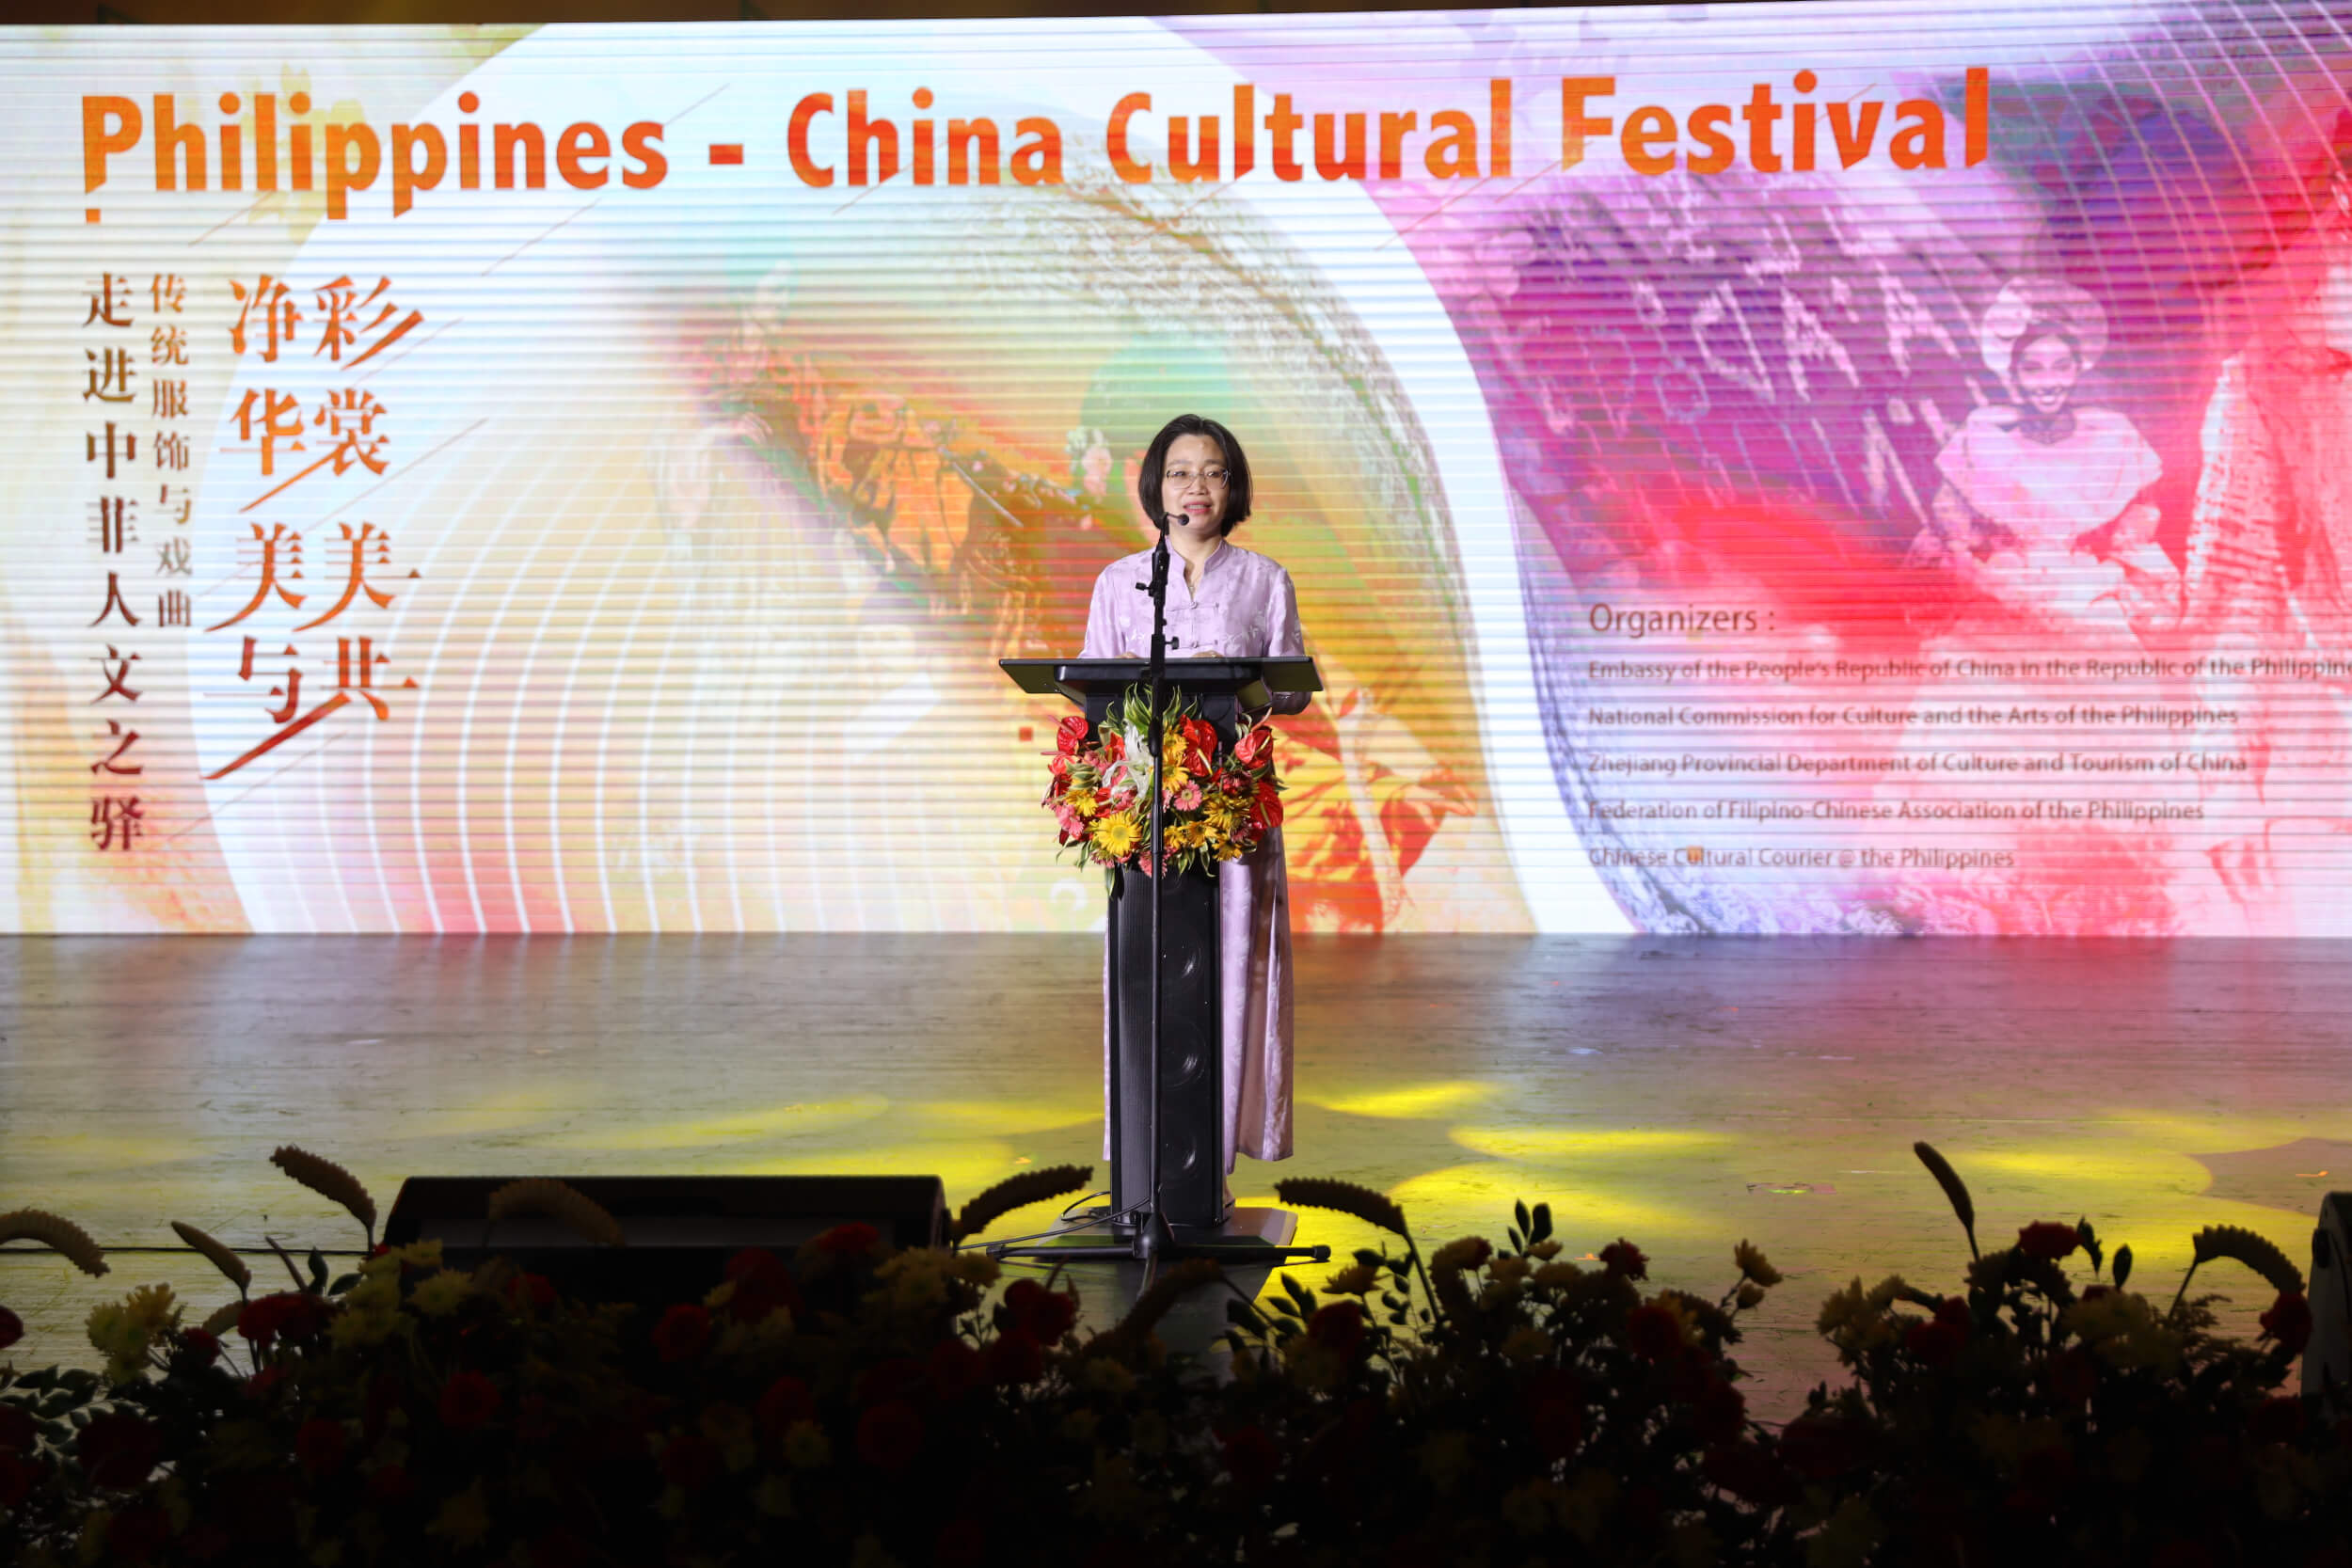 Consul General Zhang Zhen emphasized that China and the Philippines are close neighbors who have learned to understand and respect each other.